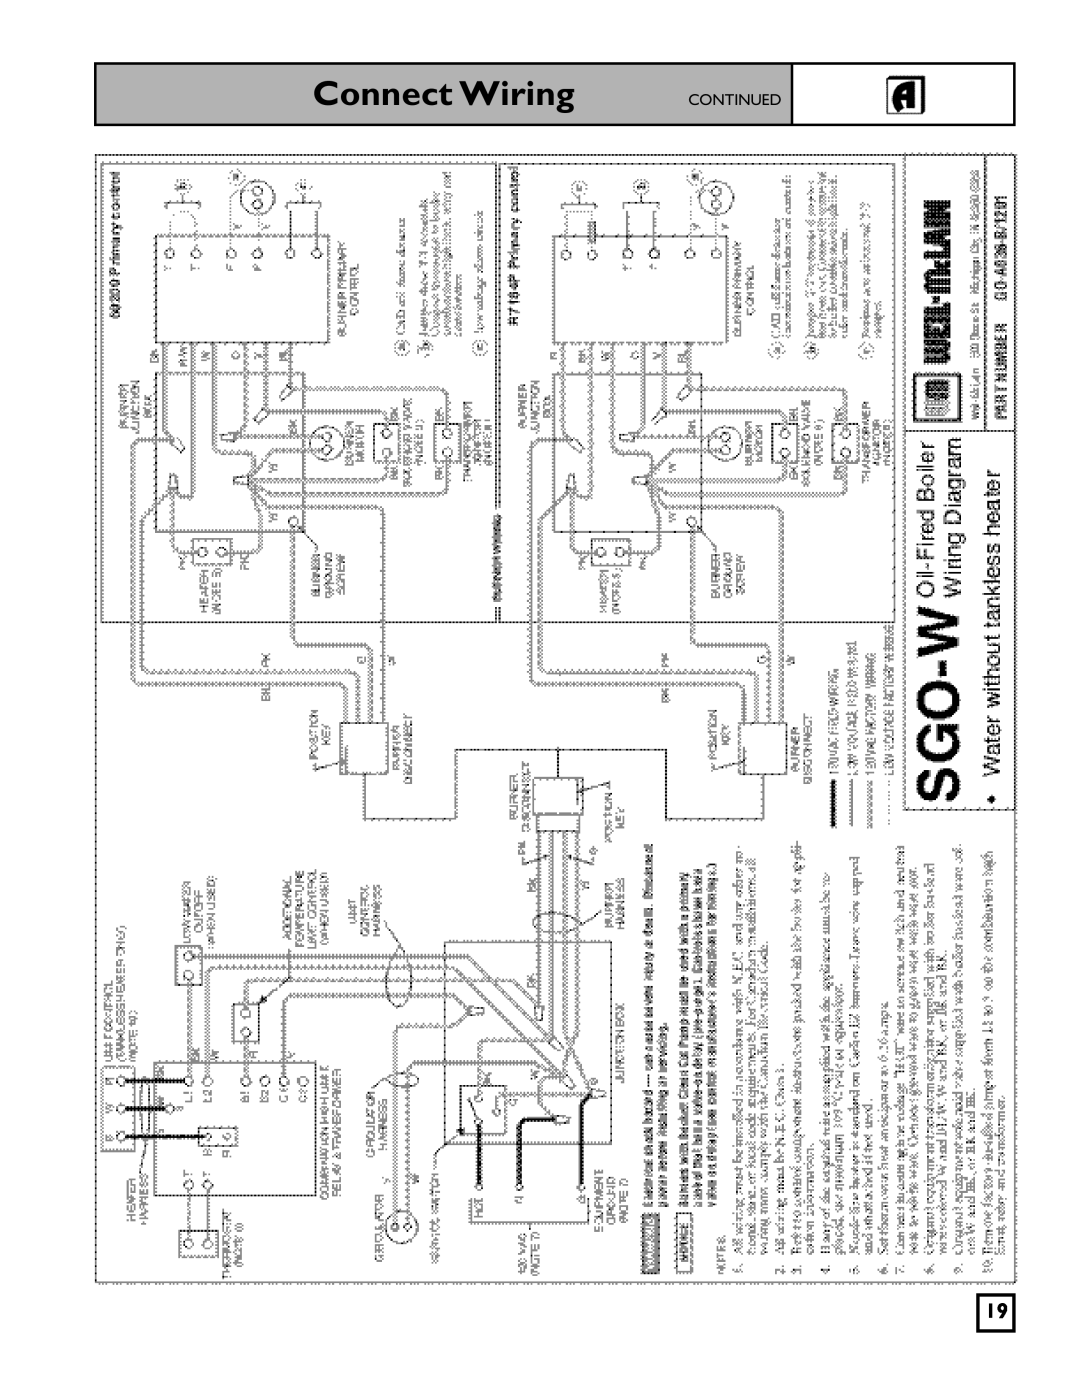 Weil-McLain SGO-W SERIES 3 OIL-FIRED NATURAL DRAFT WATER BOILER, 550-141-827/1201 manual Connect Wiring, Continued 